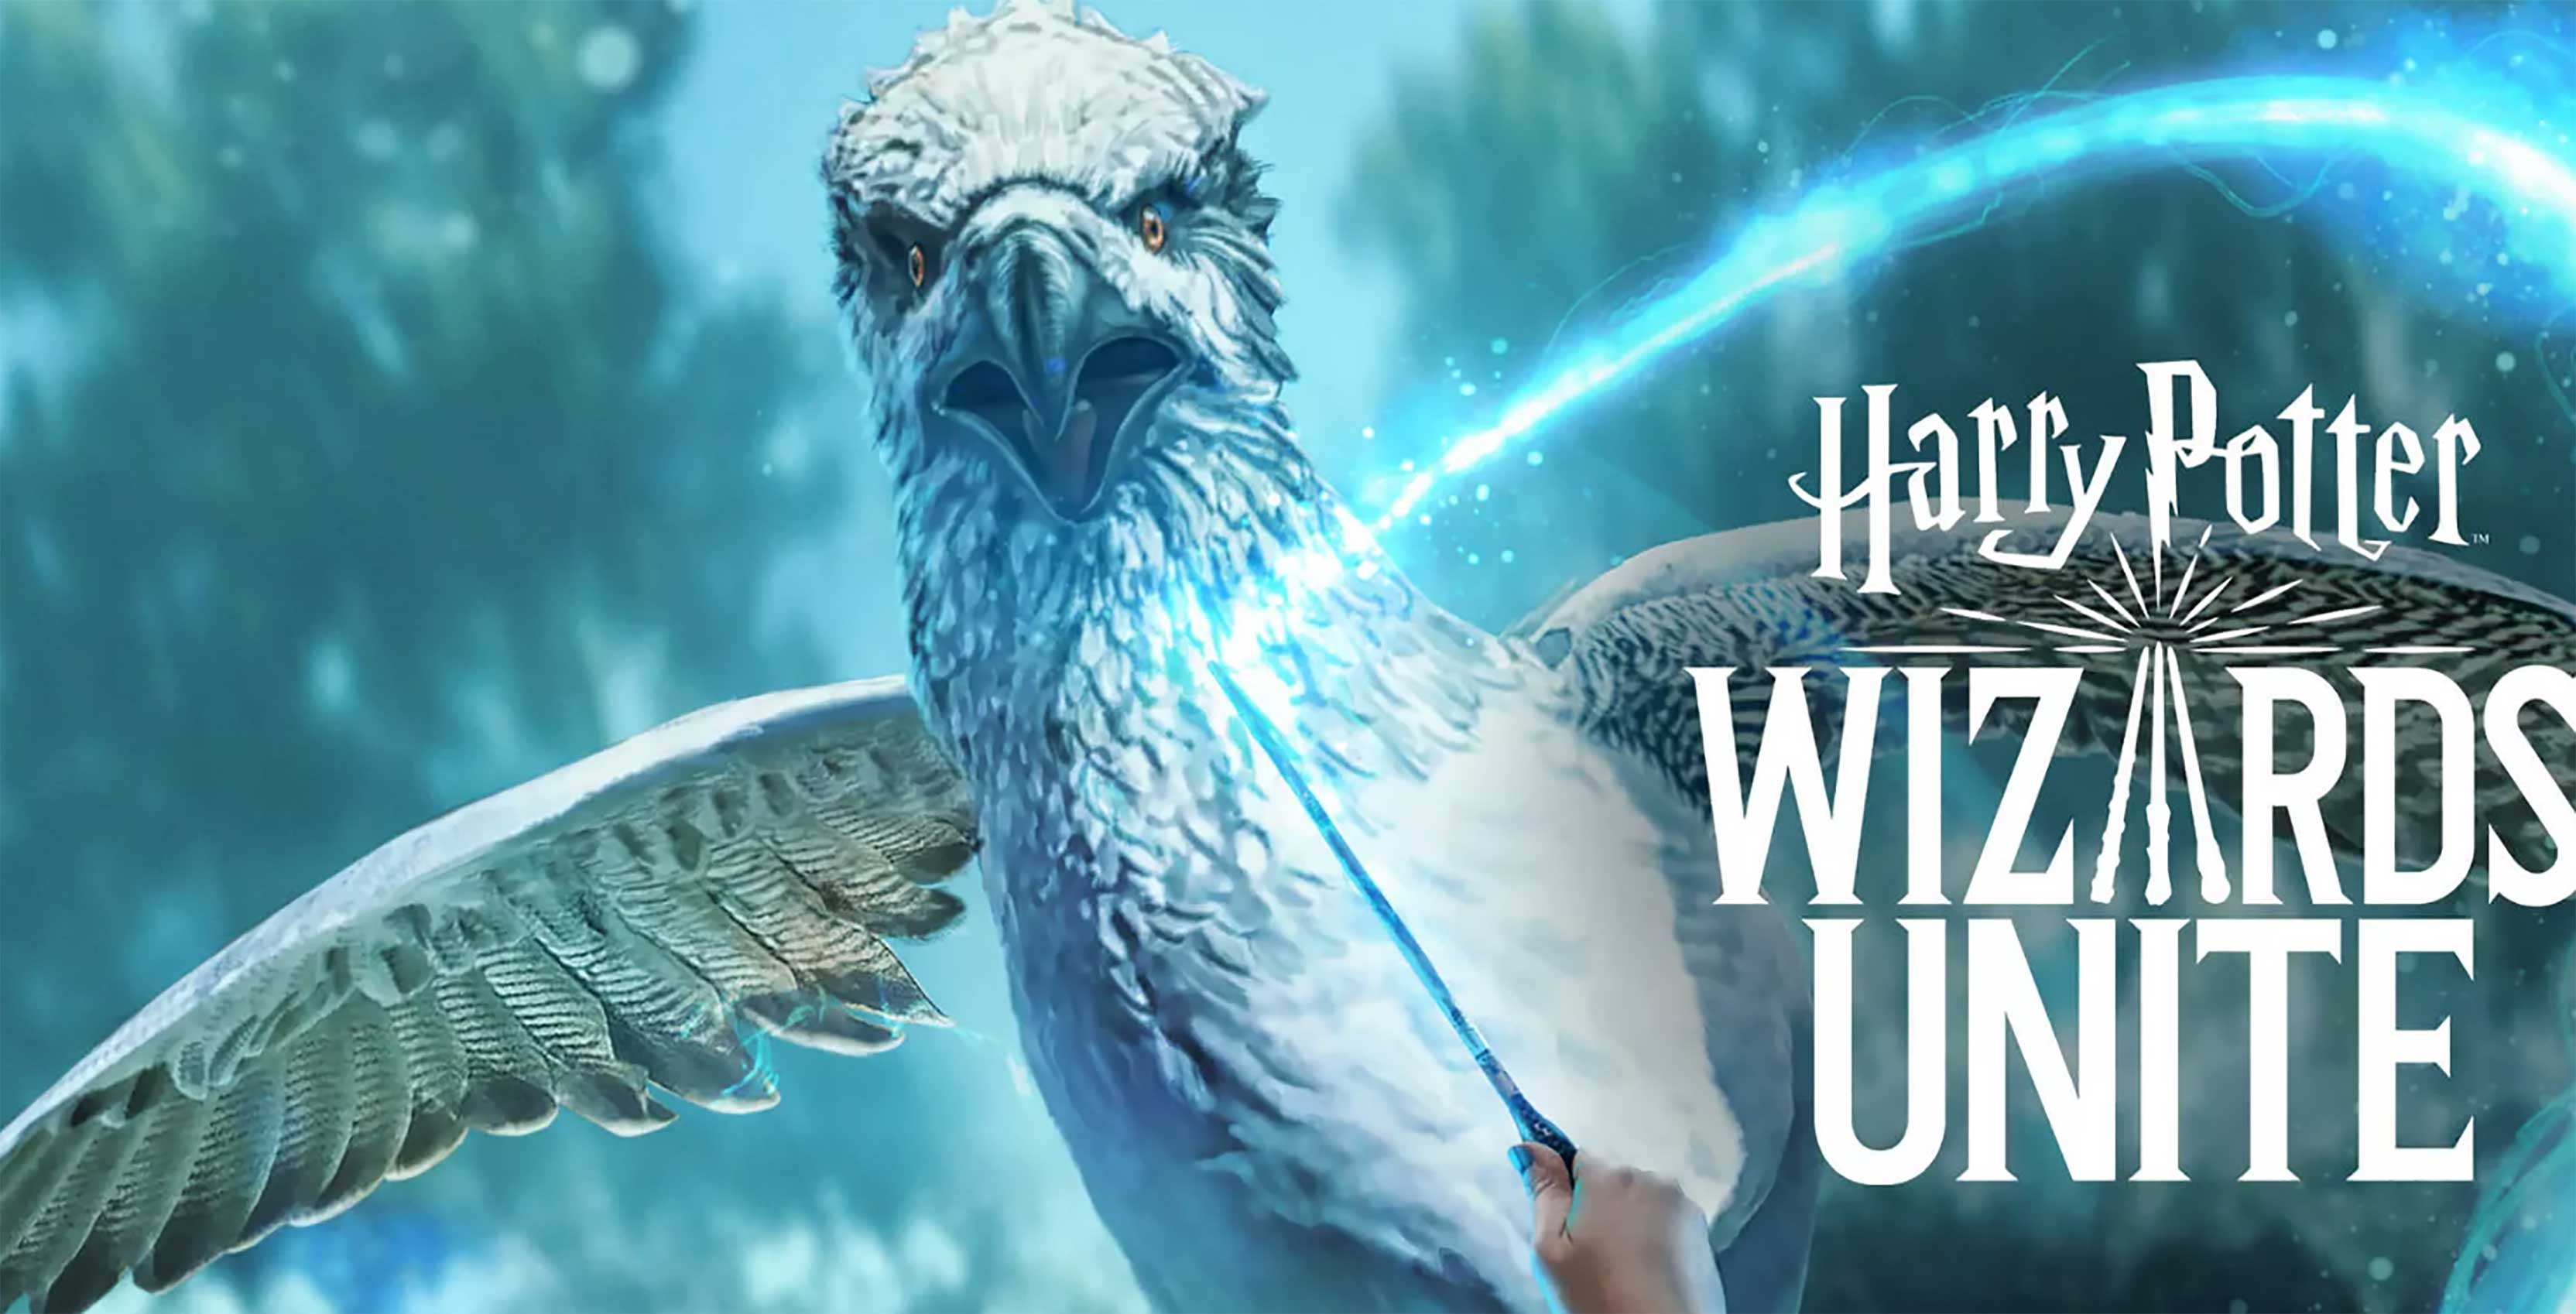 Harry Potter: Wizards Unite Hippogriff